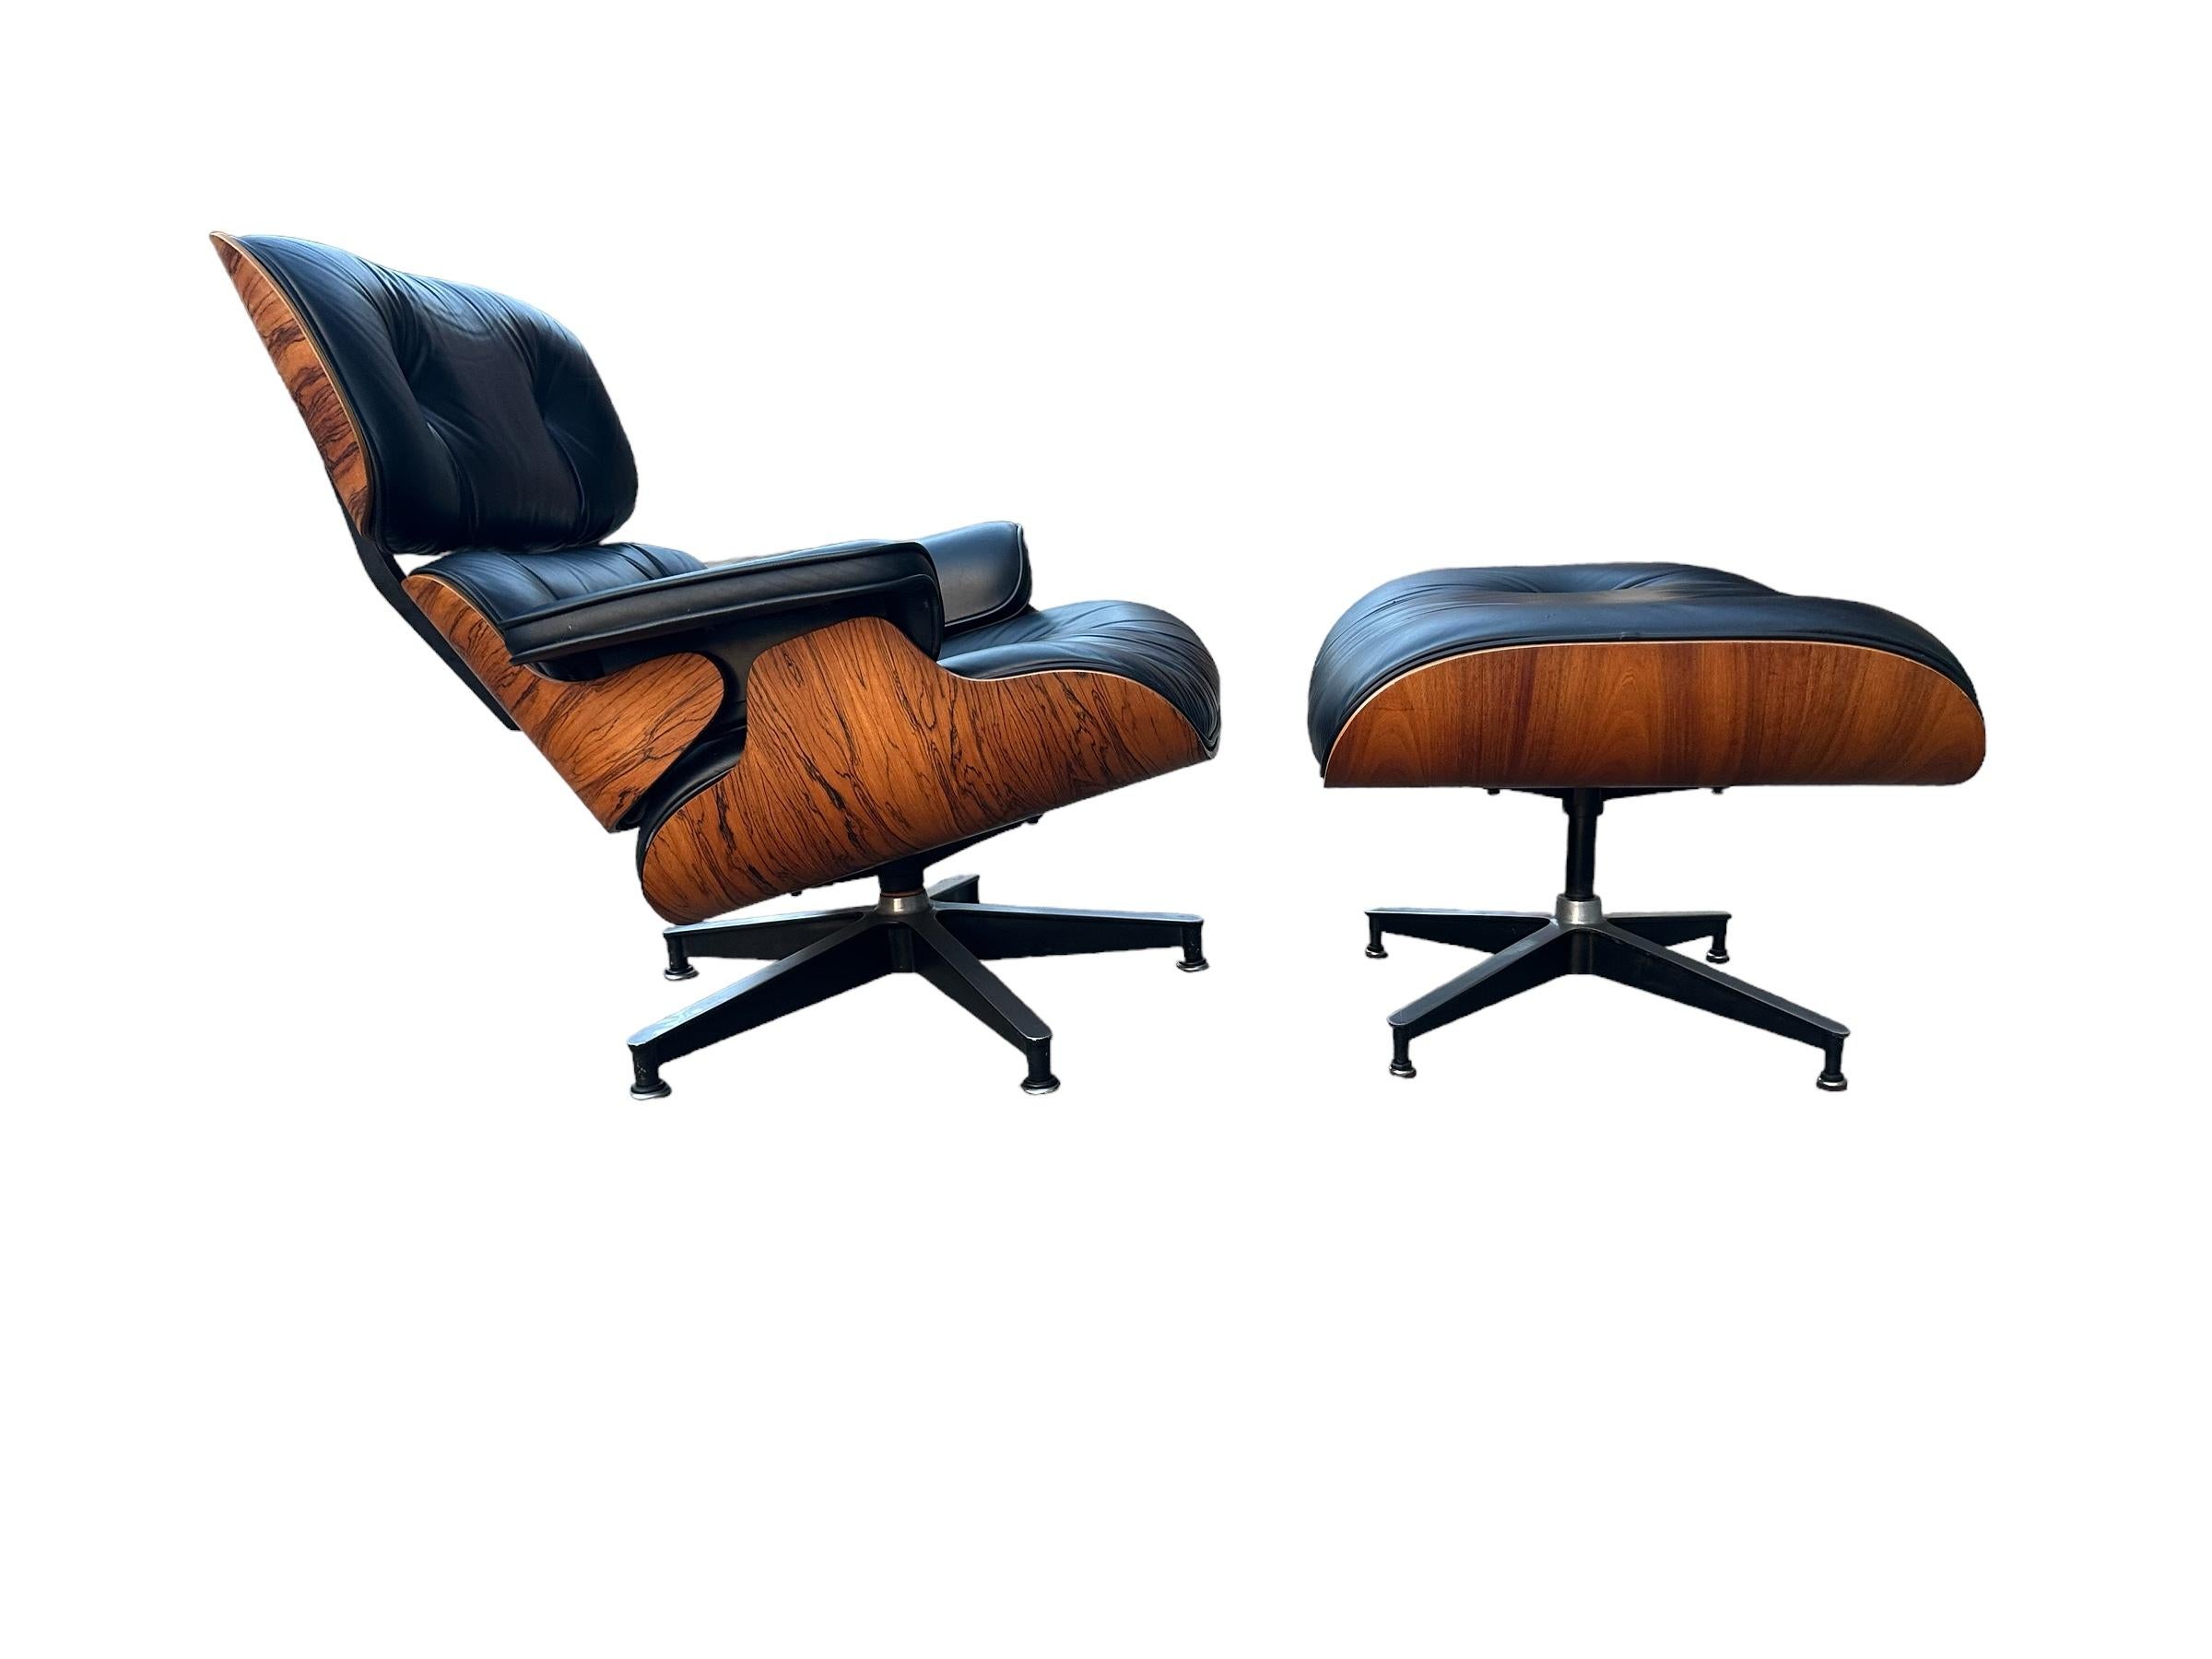 Iconic vintage Herman Miller Eames lounge chair and ottoman. Featuring lustrous refinished Brazilian rose wood, boasting beautiful color and grain pattern. Black leather cushions in great shape. Even color and finish. No missing buttons. Chair and